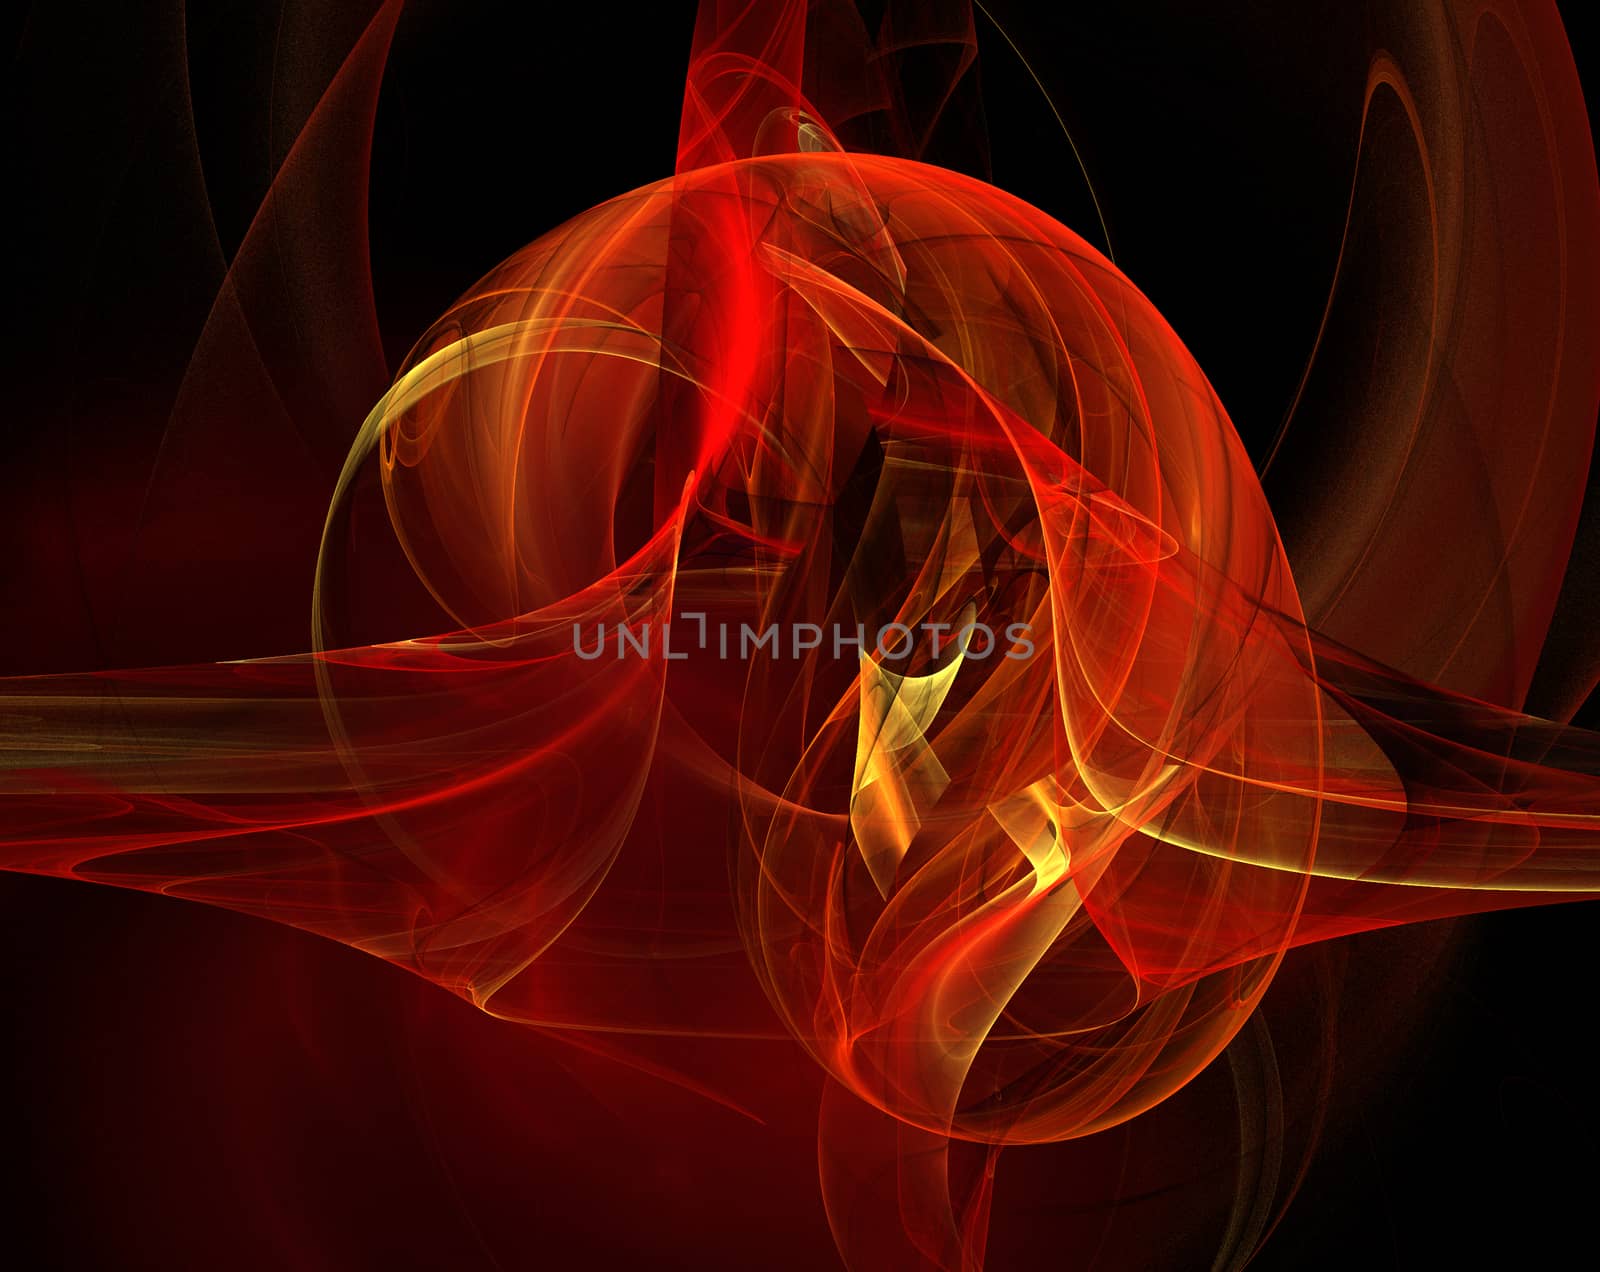 Abstract image for background and other